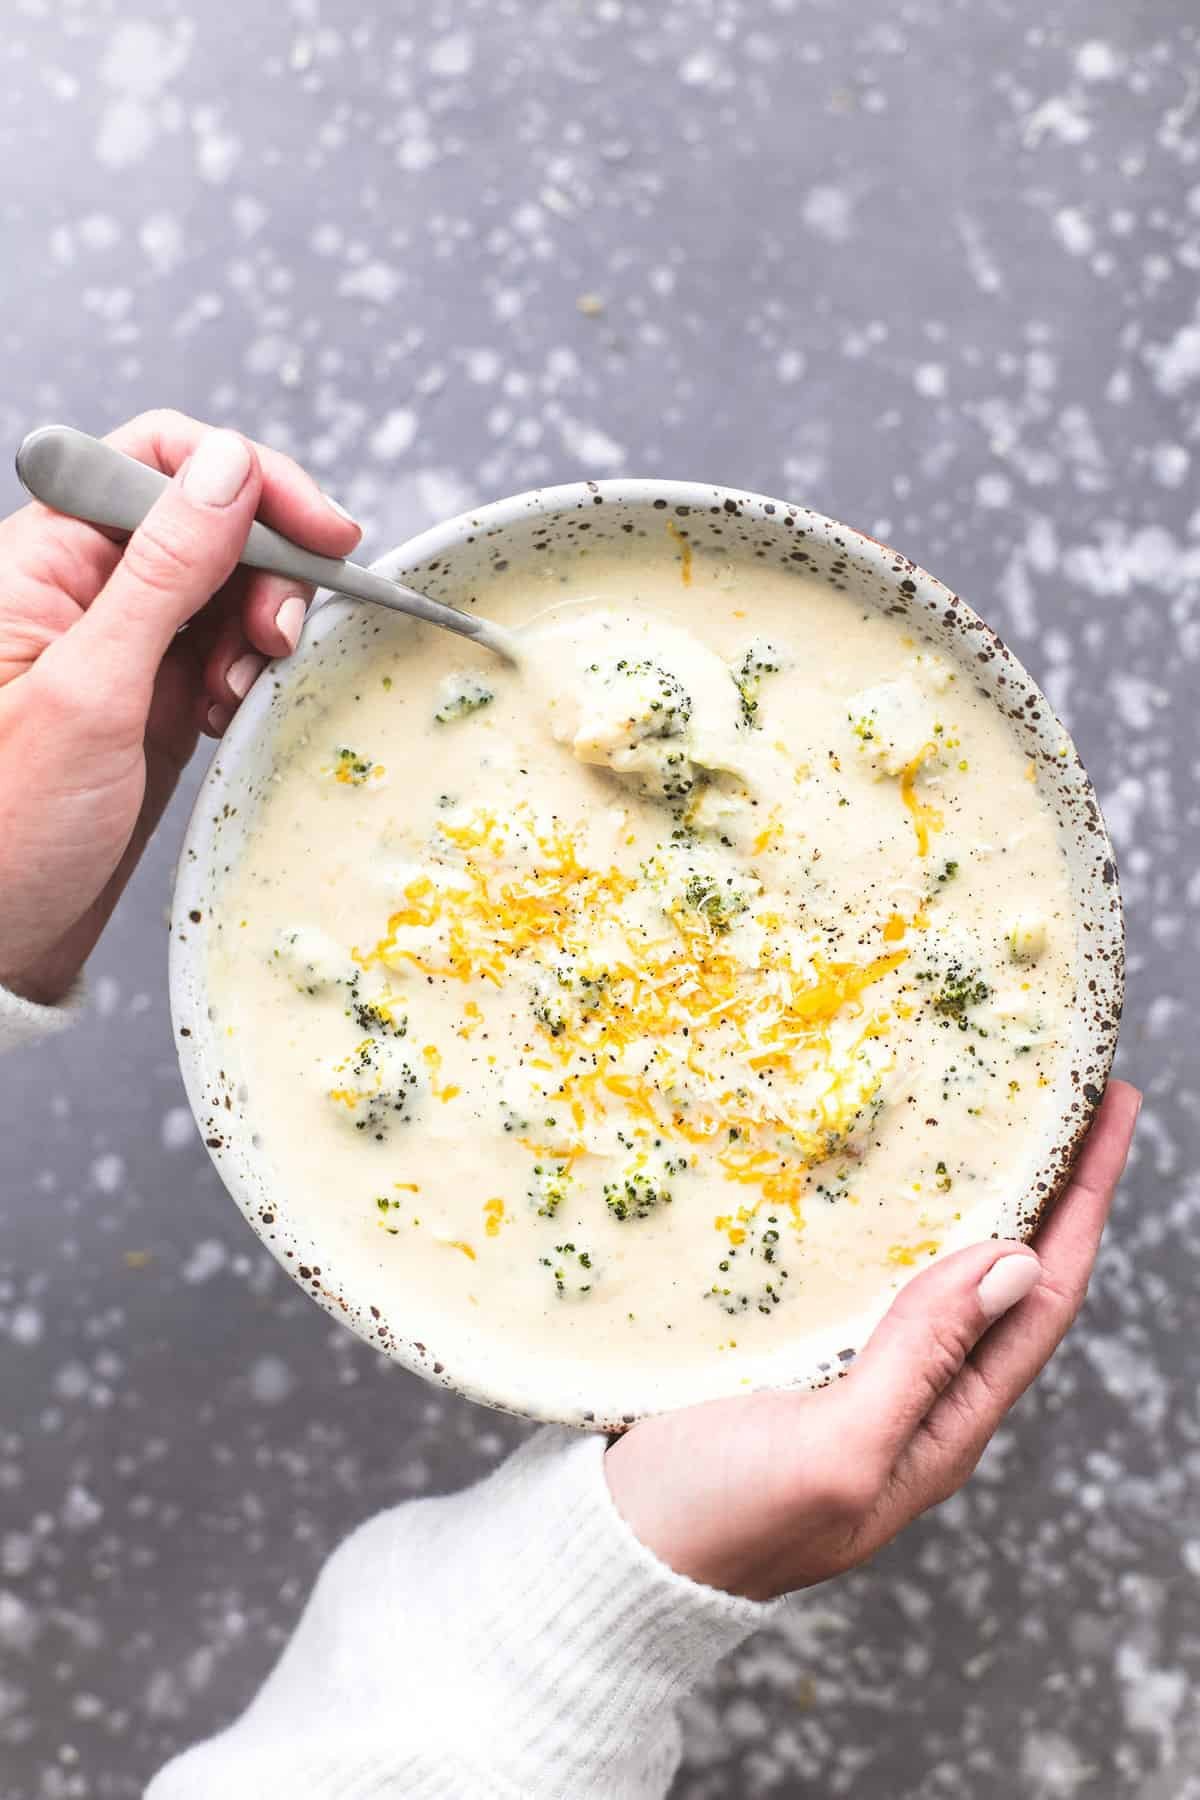 top view of a pair of hands holding a bowl of broccoli cheese soup with a spoon.